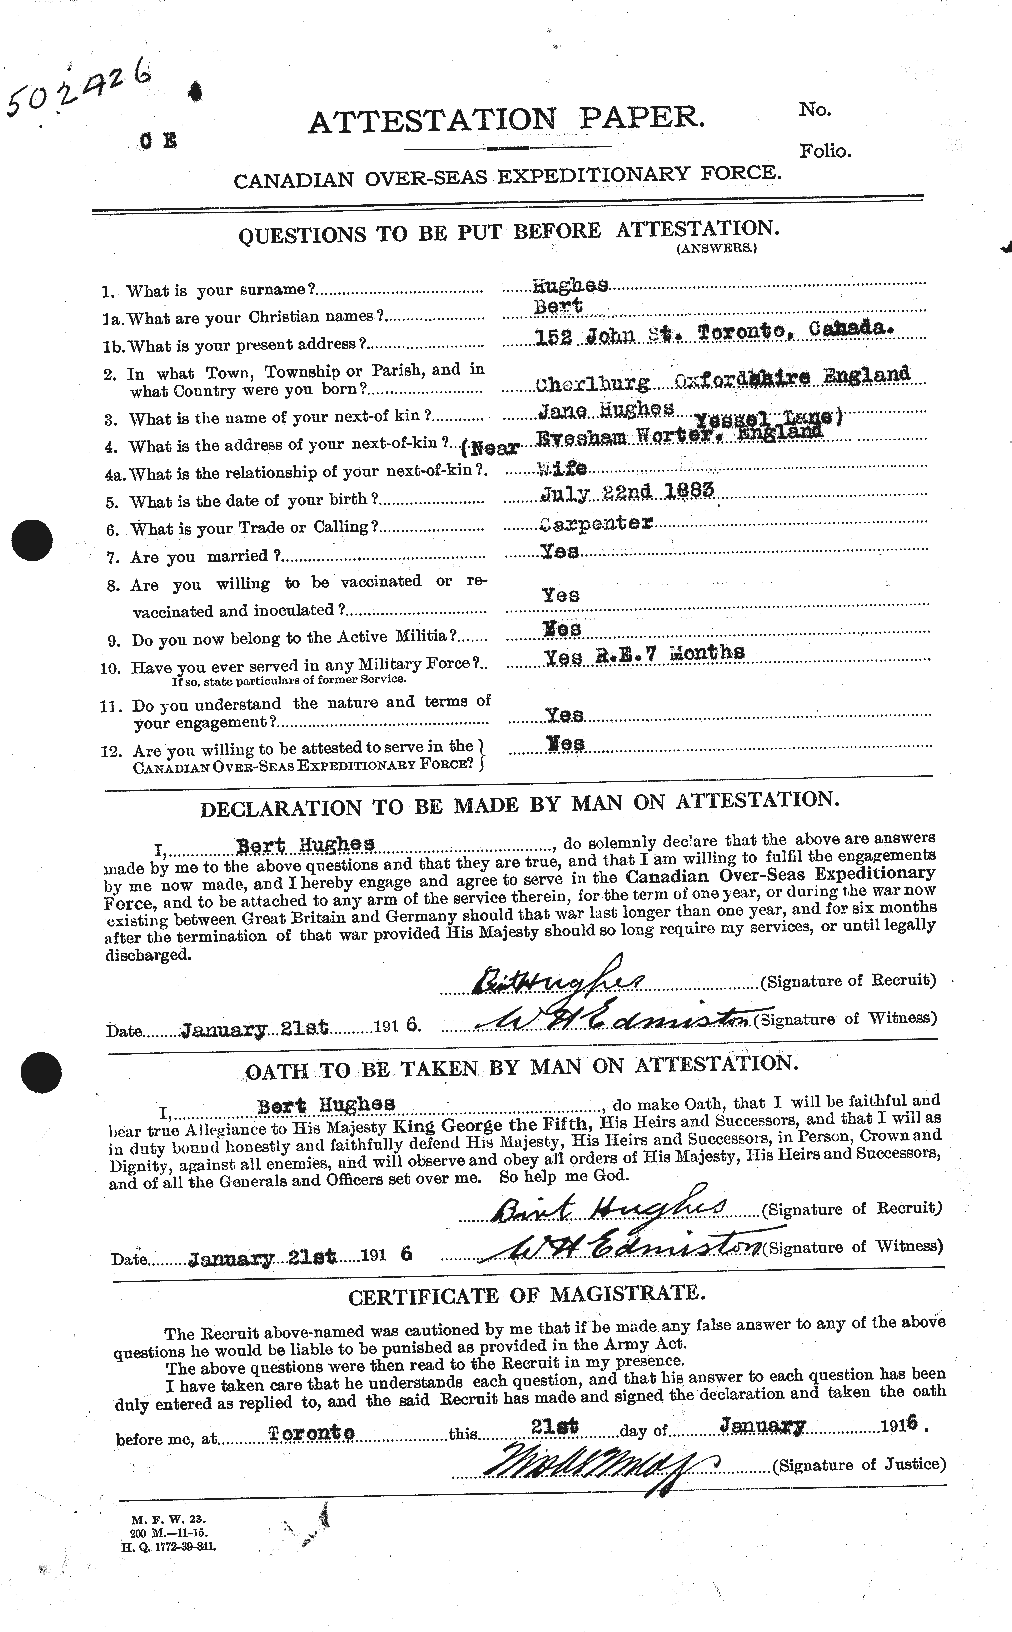 Personnel Records of the First World War - CEF 402587a